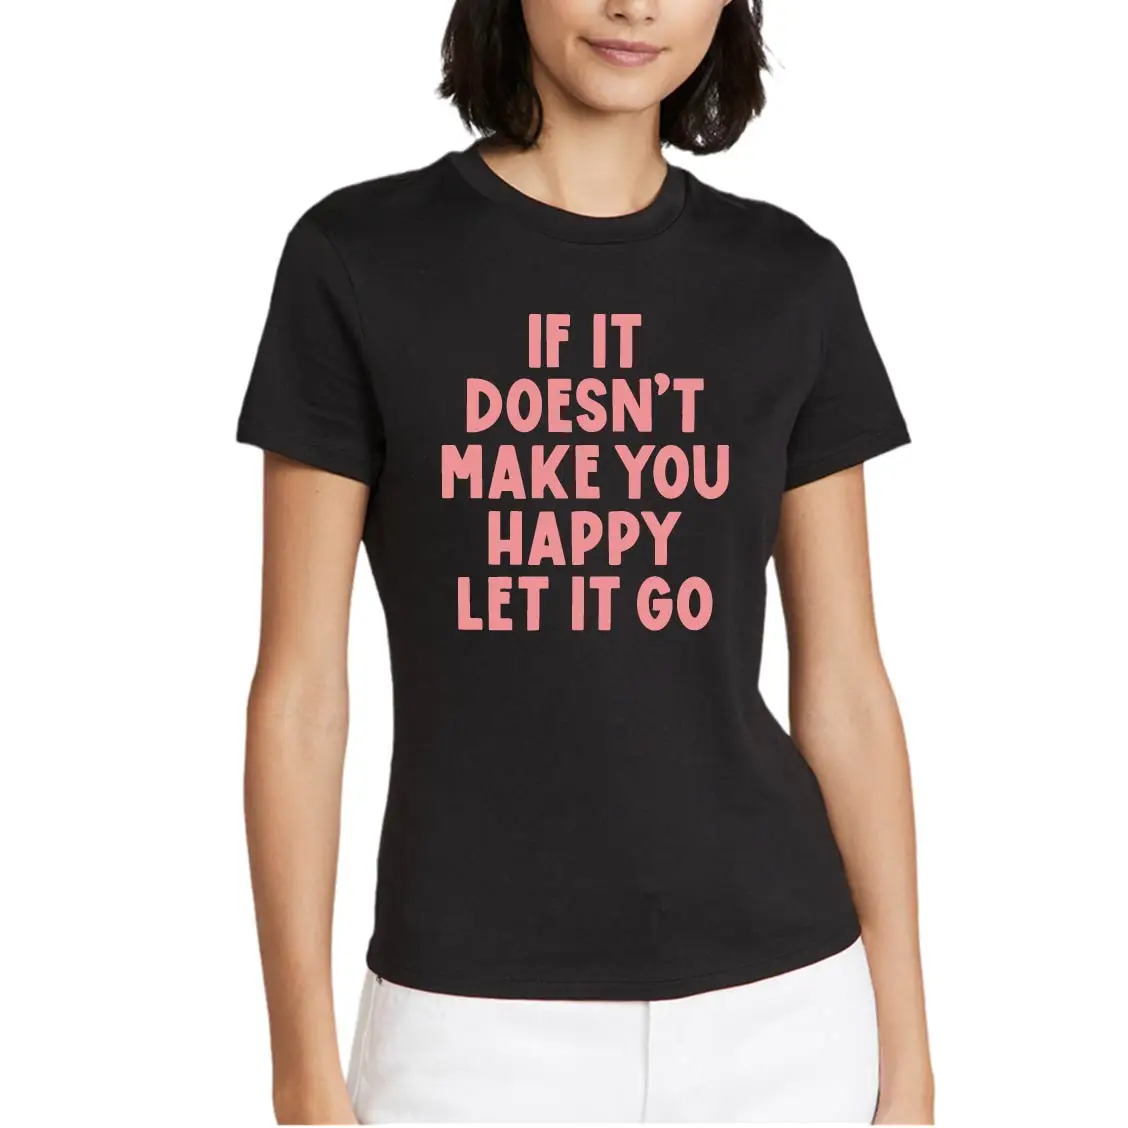 Slogan Female Tee-Shirt If It Does't Make You Happy Let It Go Multicolor Casual Cotton T-Shirt Summer Womens Boutique Tops Tee